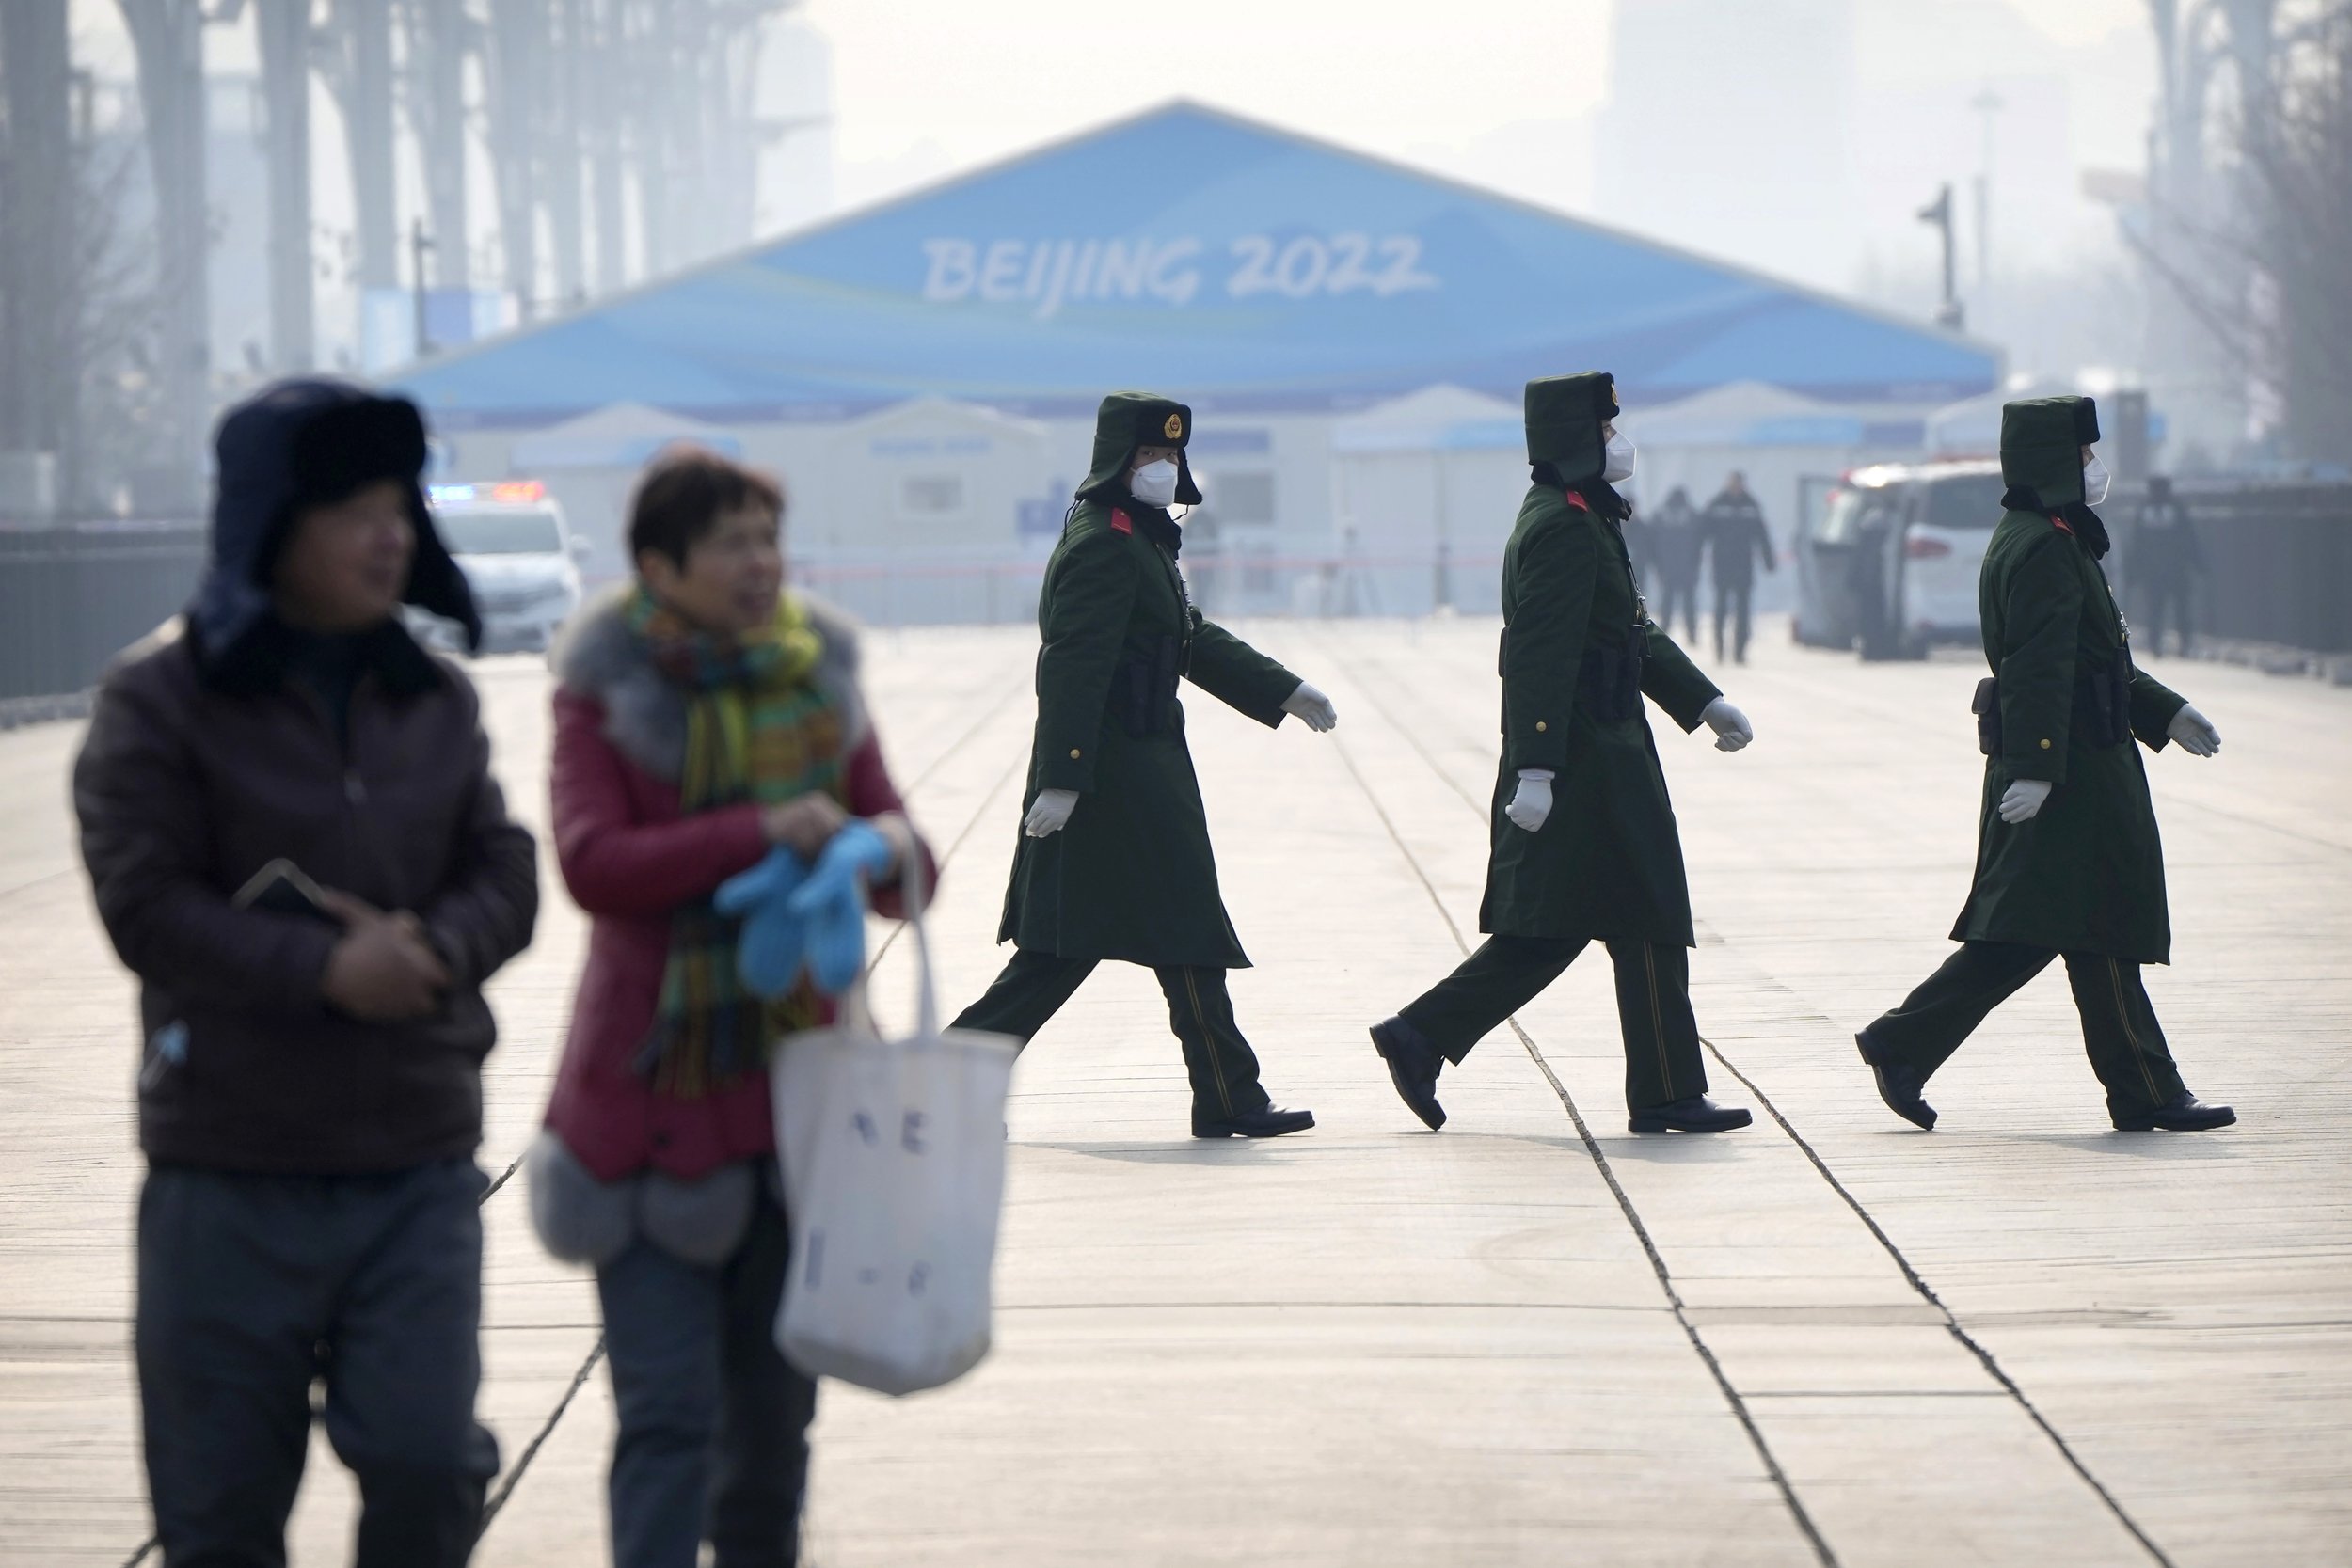  Chinese paramilitary police walk in formation on the Olympic Green near the edge of the closed-loop area at the 2022 Winter Olympics in Beijing, Sunday, Jan. 30, 2022. (AP Photo/Mark Schiefelbein) 